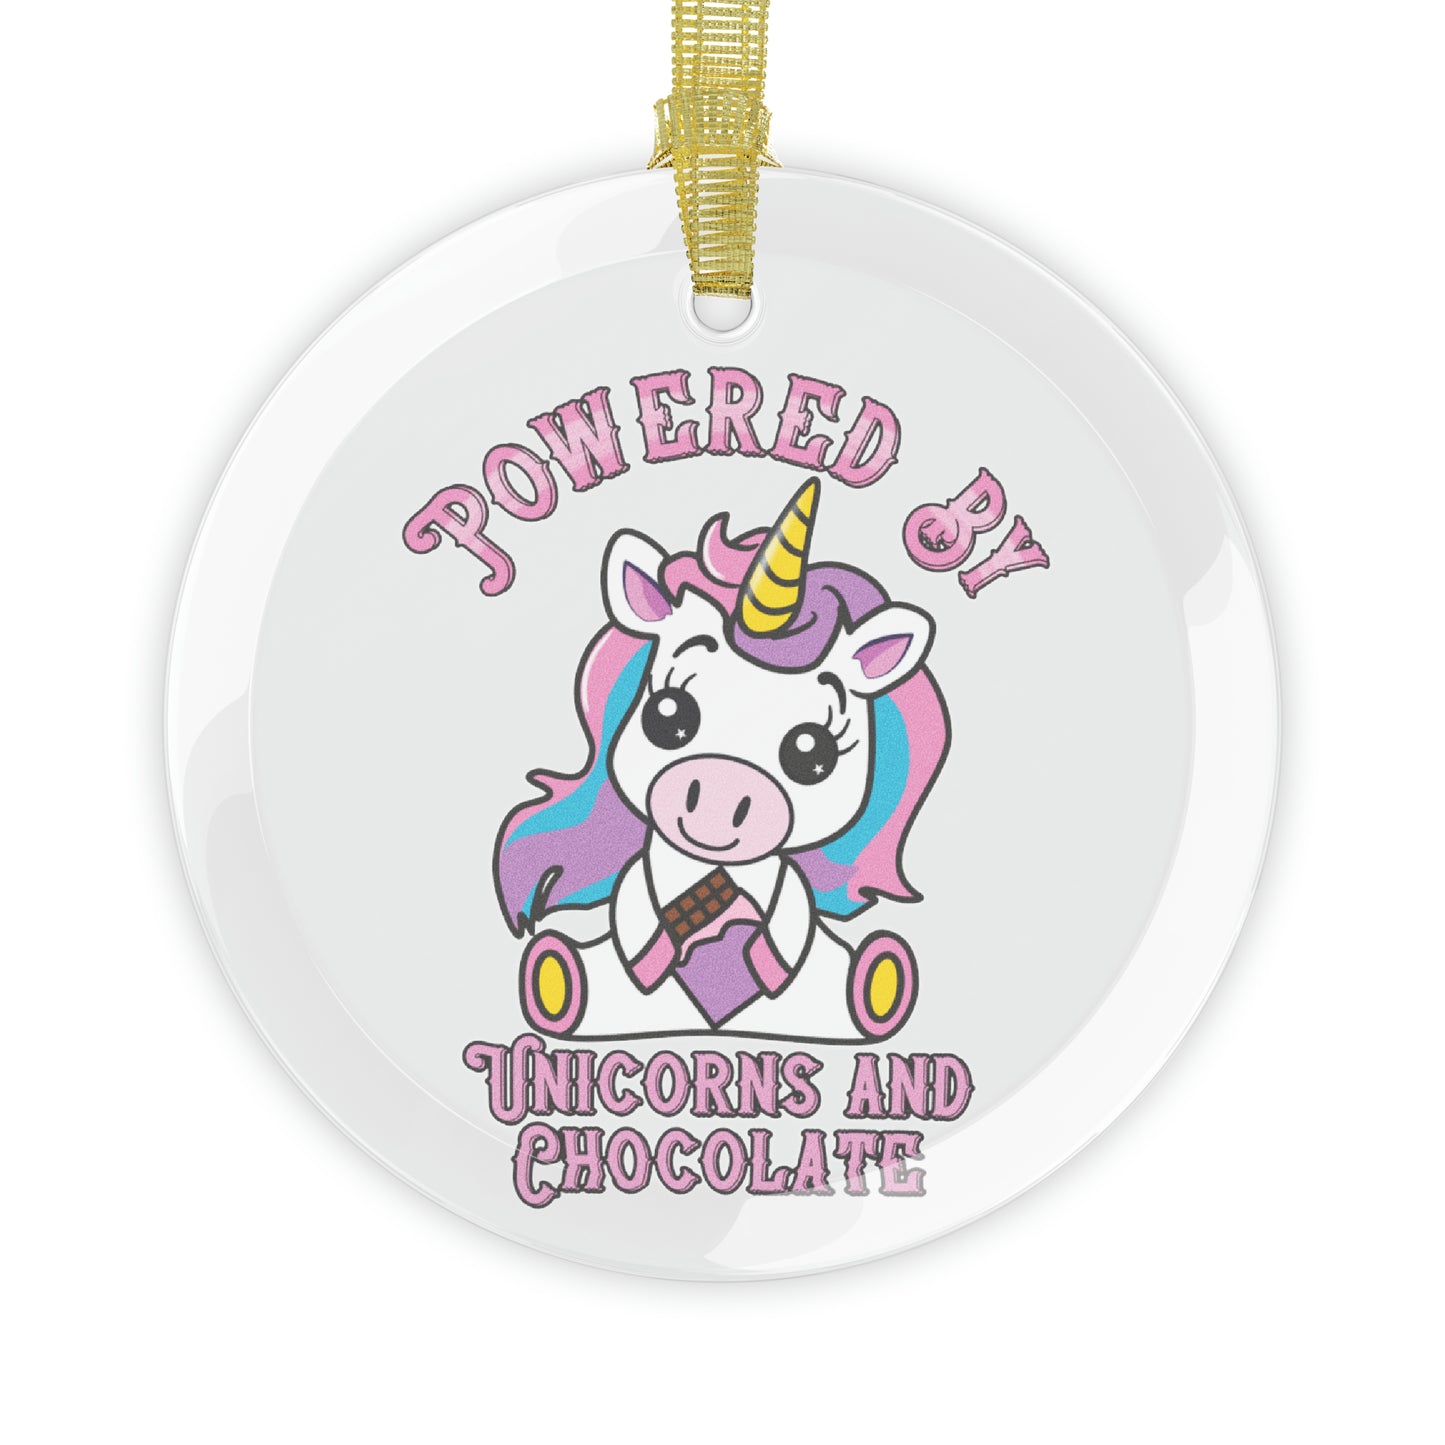 Powered by Unicorns and Chocolate Glass Ornaments